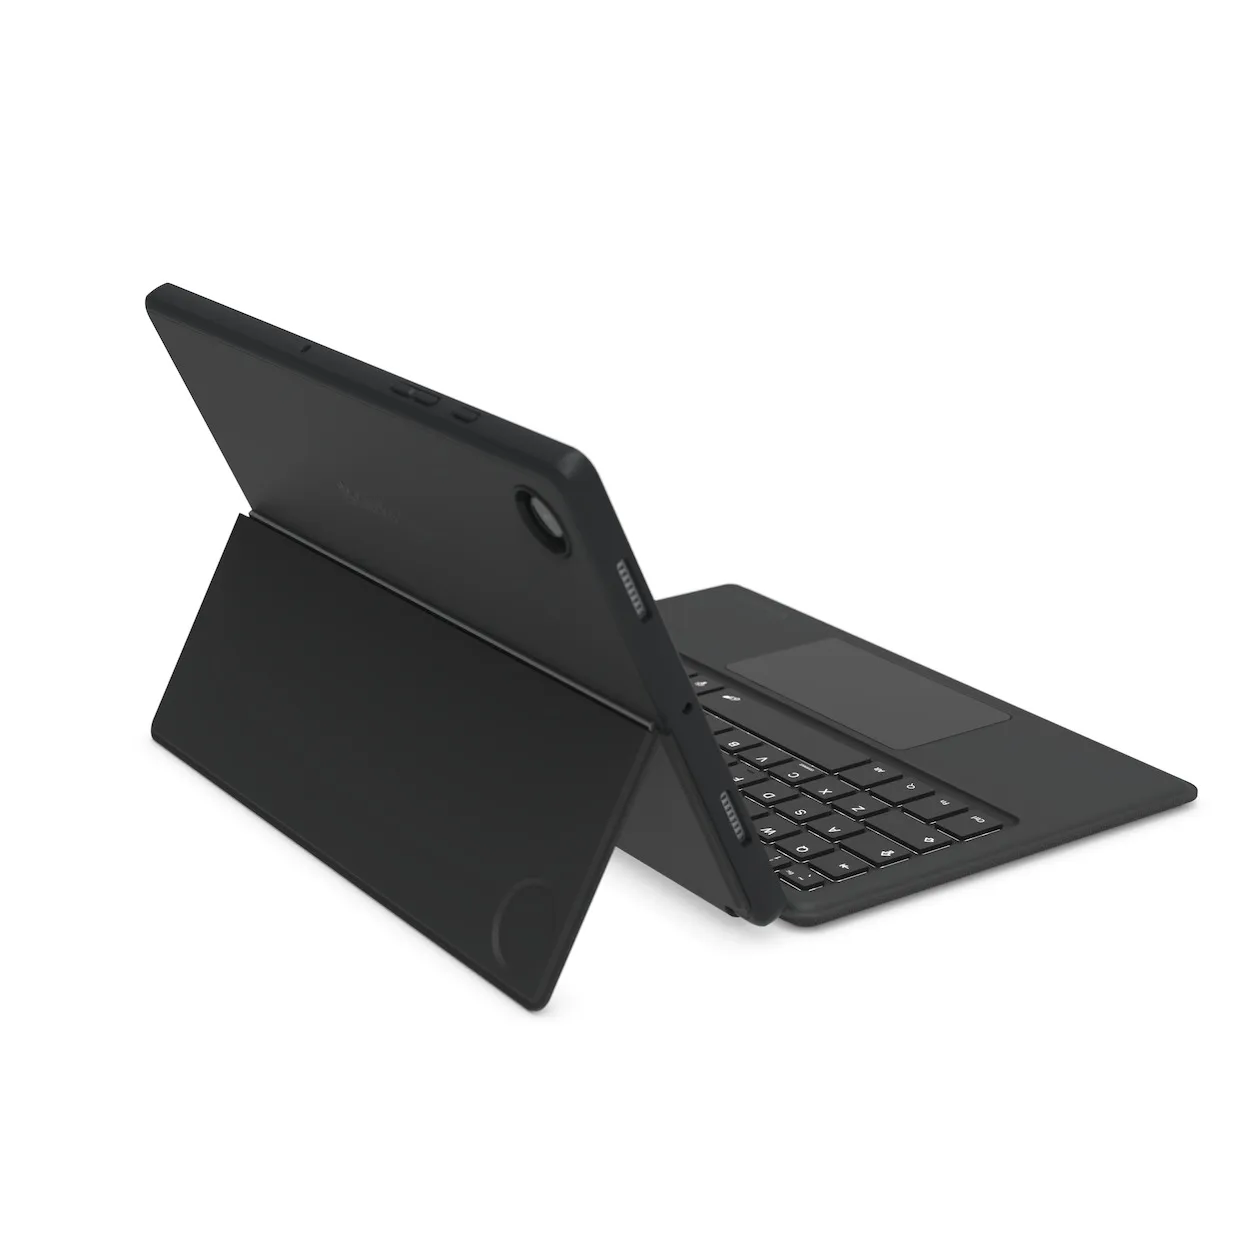 Gecko Keyboard cover voor Samsung Tab A8 (2021) Qwerty